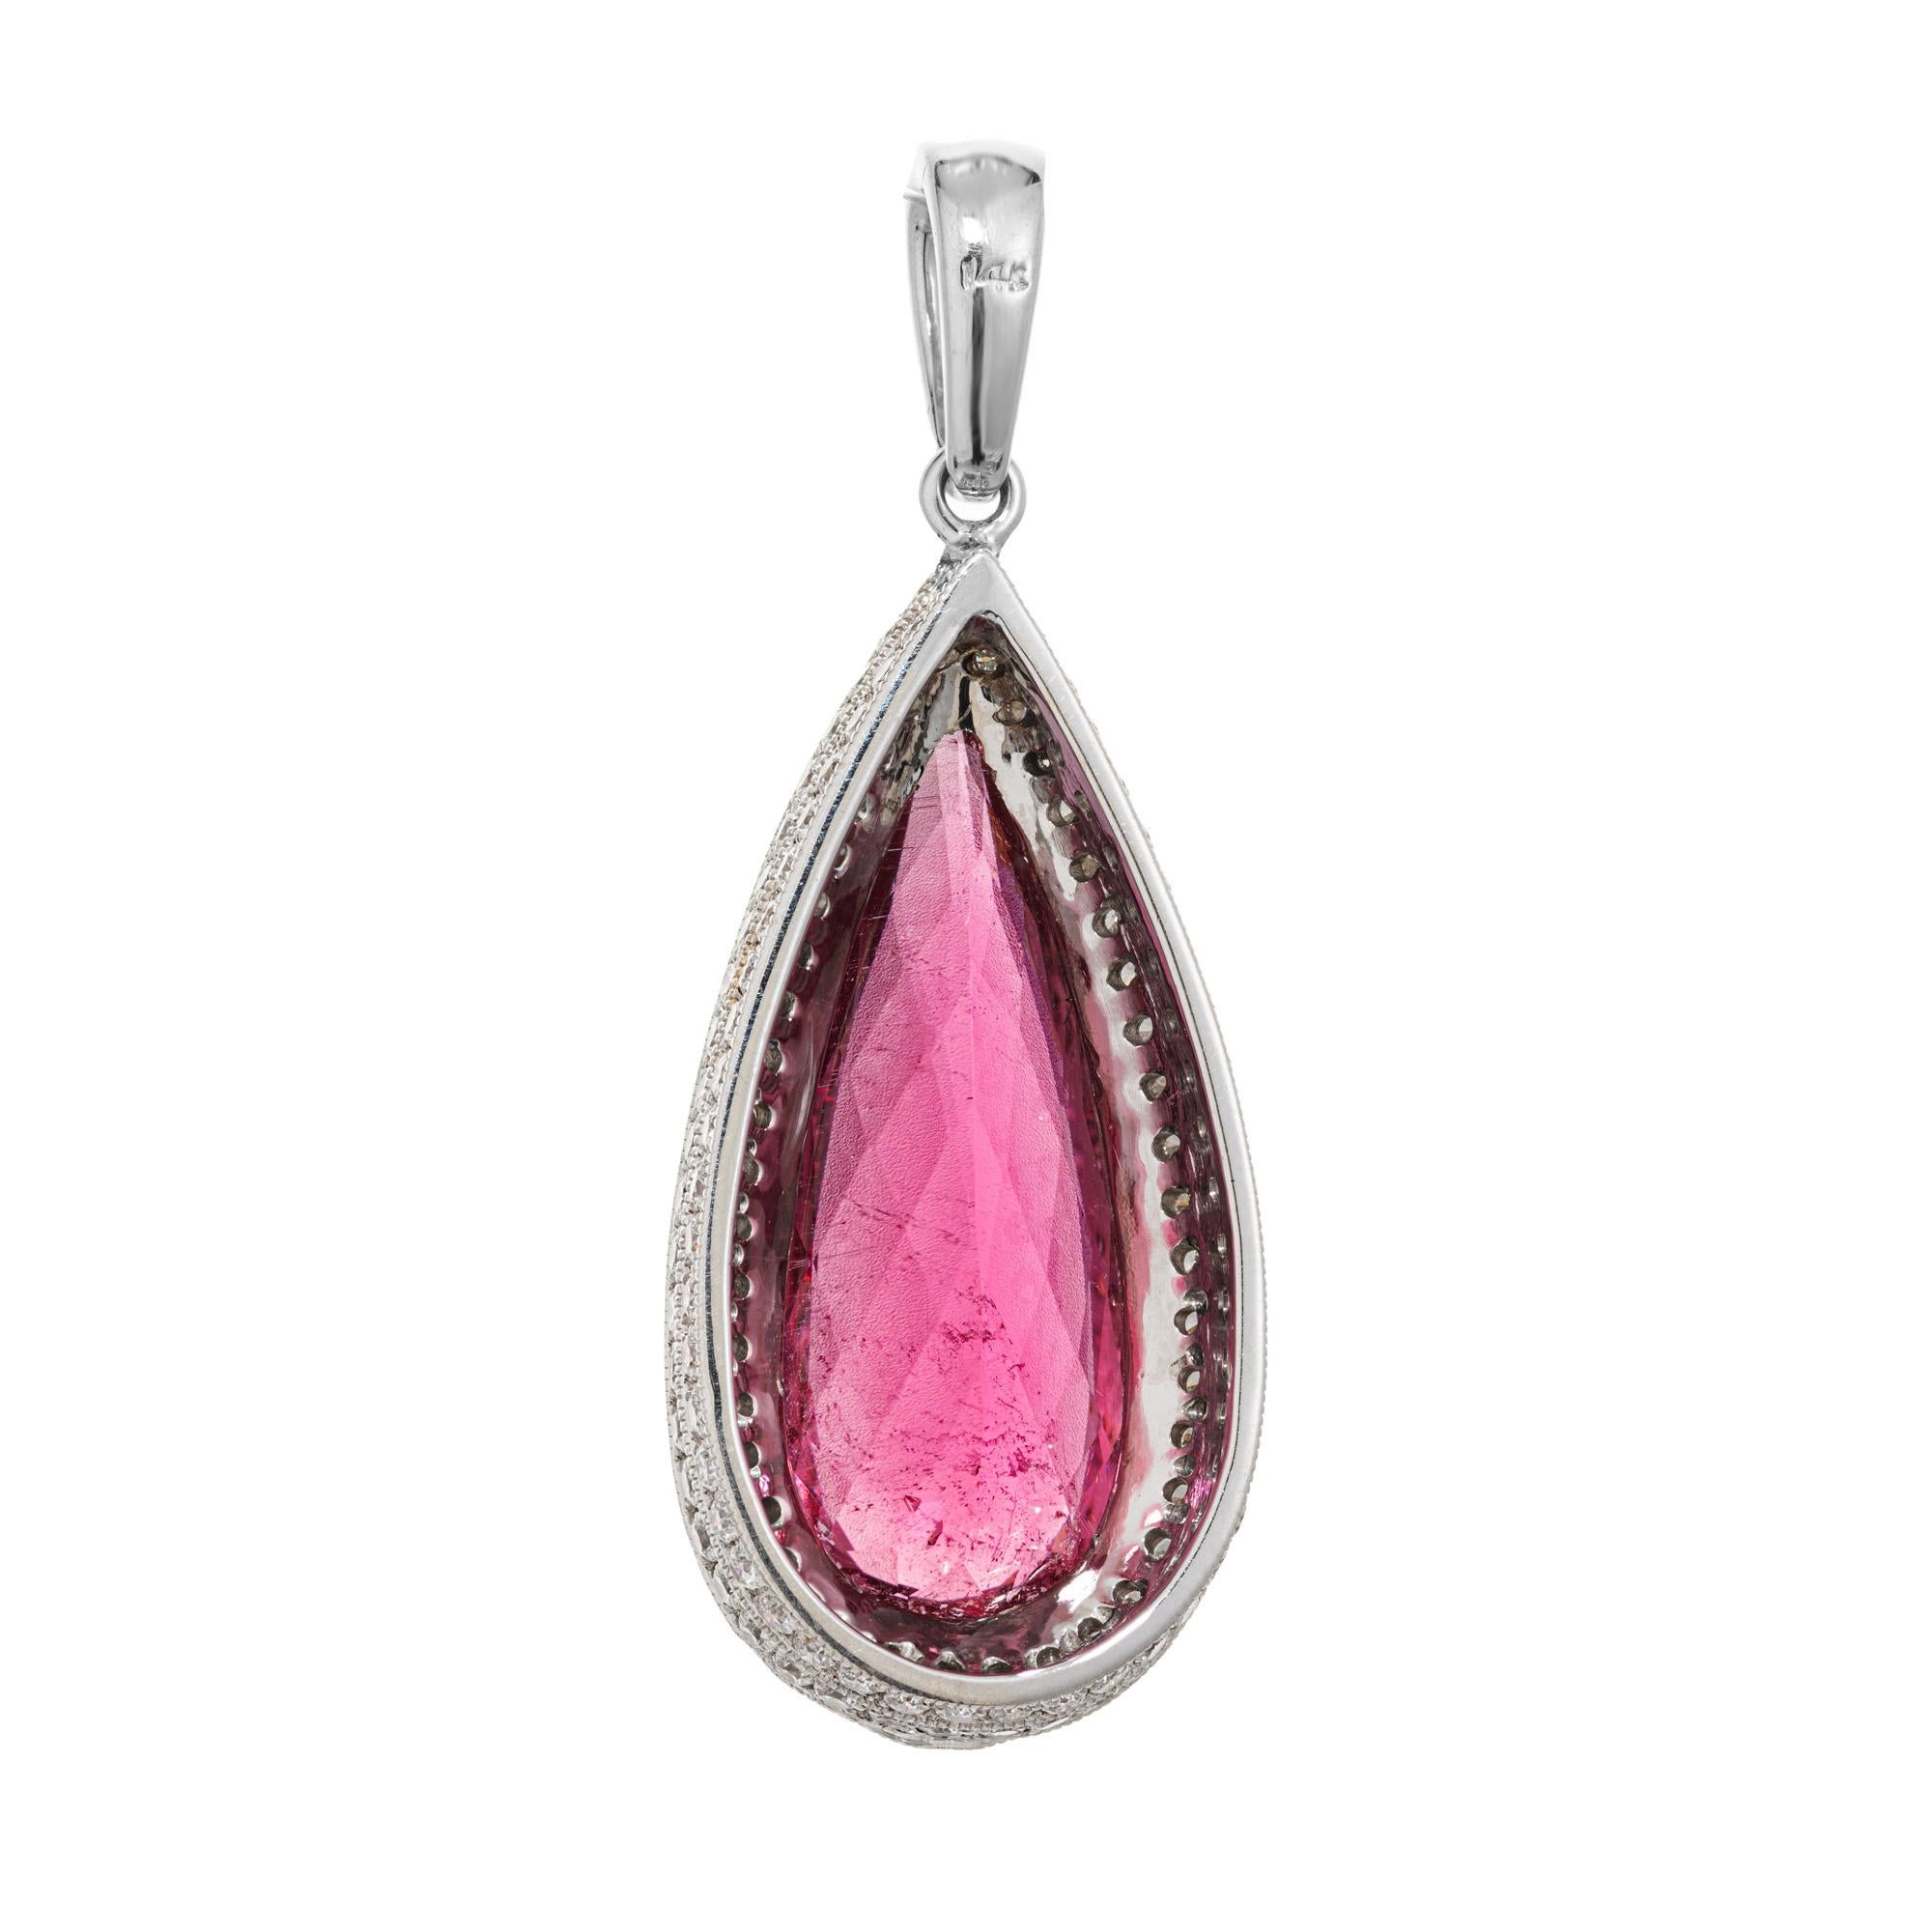 Pink Tourmaline Rubellite and diamond pendant. Beautiful 6.06ct rich and deep pink pear shaped tourmaline with a halo of round cut diamonds set in 14k white gold. Along with the halo, two additional rows of round cut diamonds run along the sides of